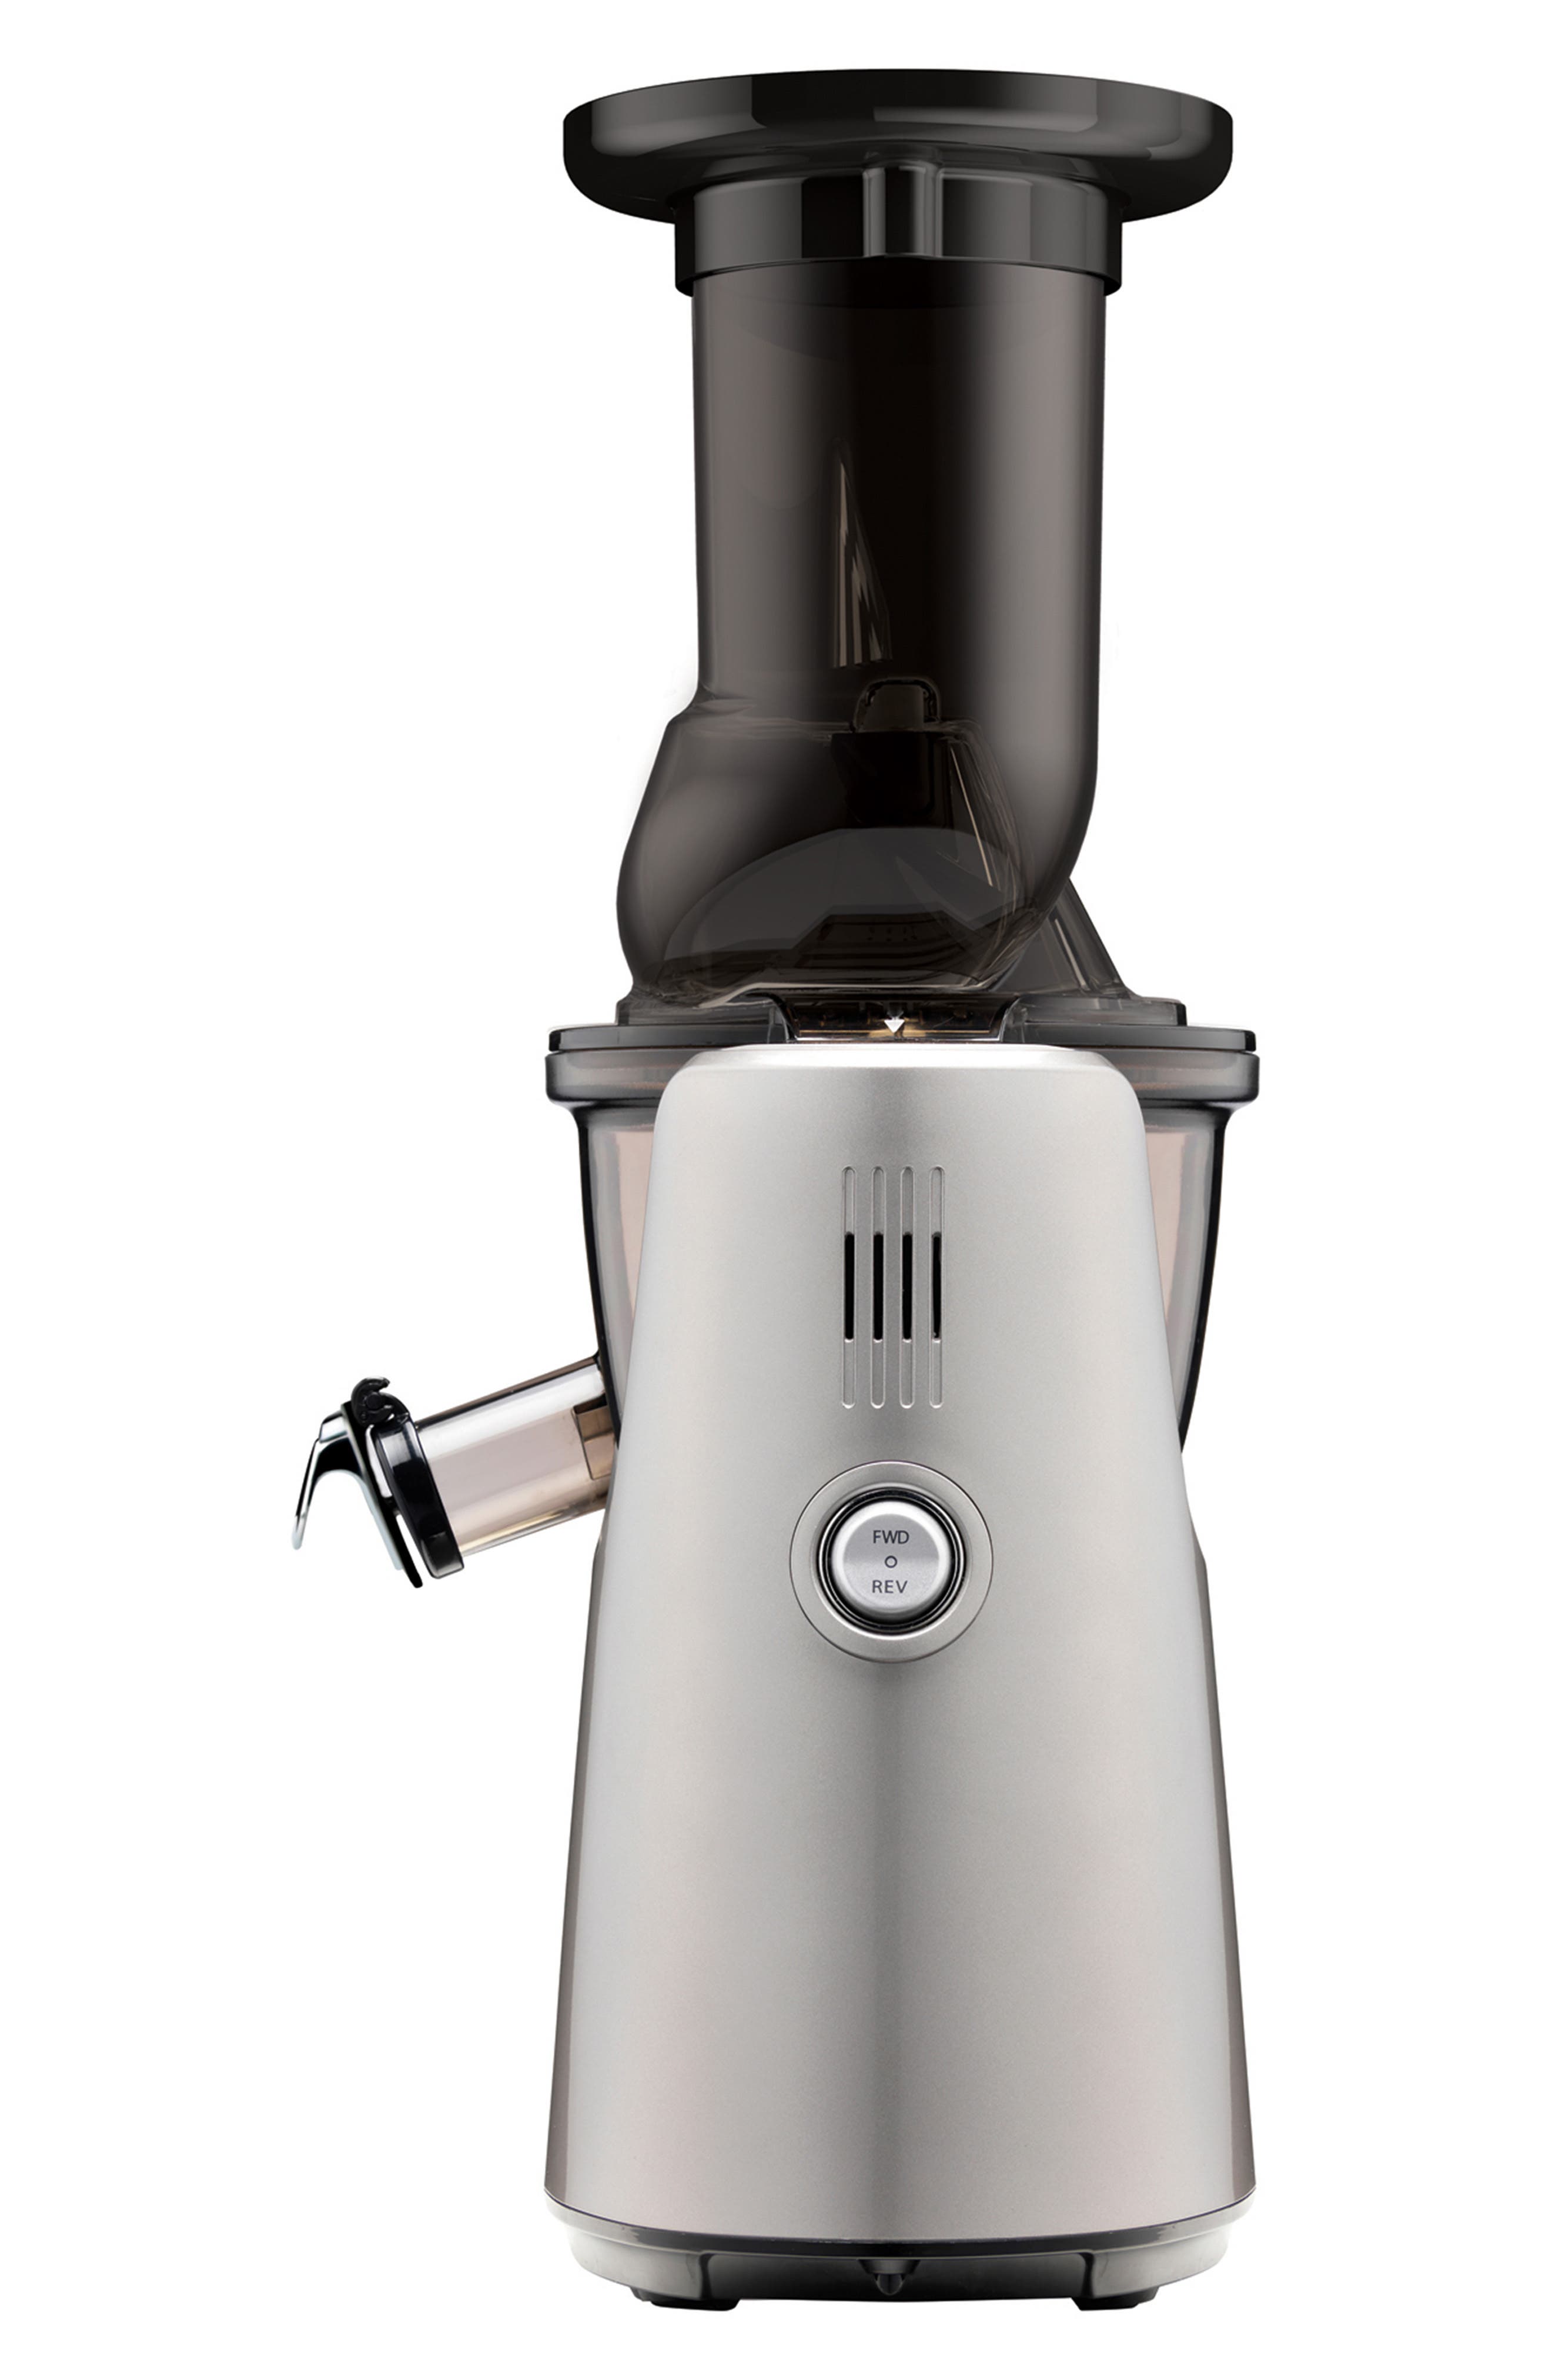 large mouthpiece and slow rotation Kuvings Juicer